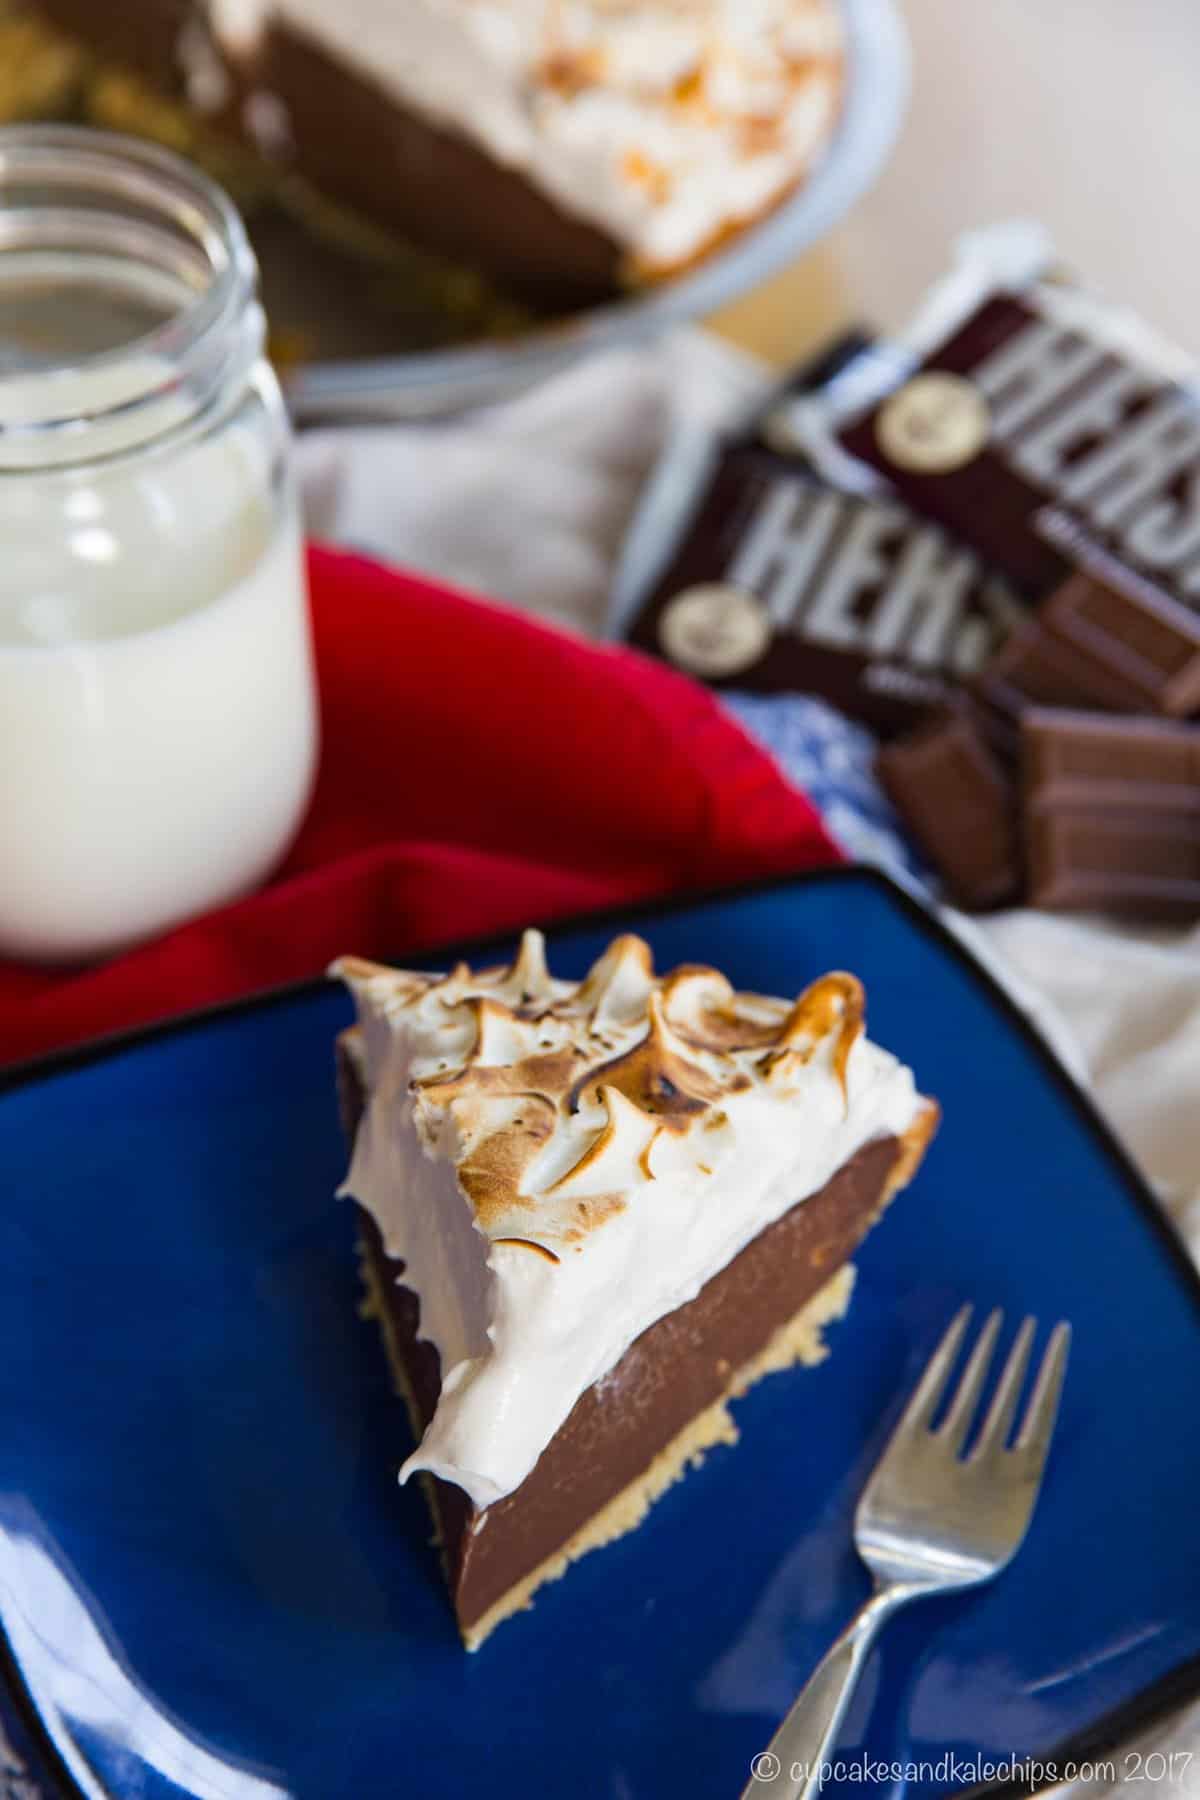 A slice of s'mores pudding pie on a blue plate next to a fork.